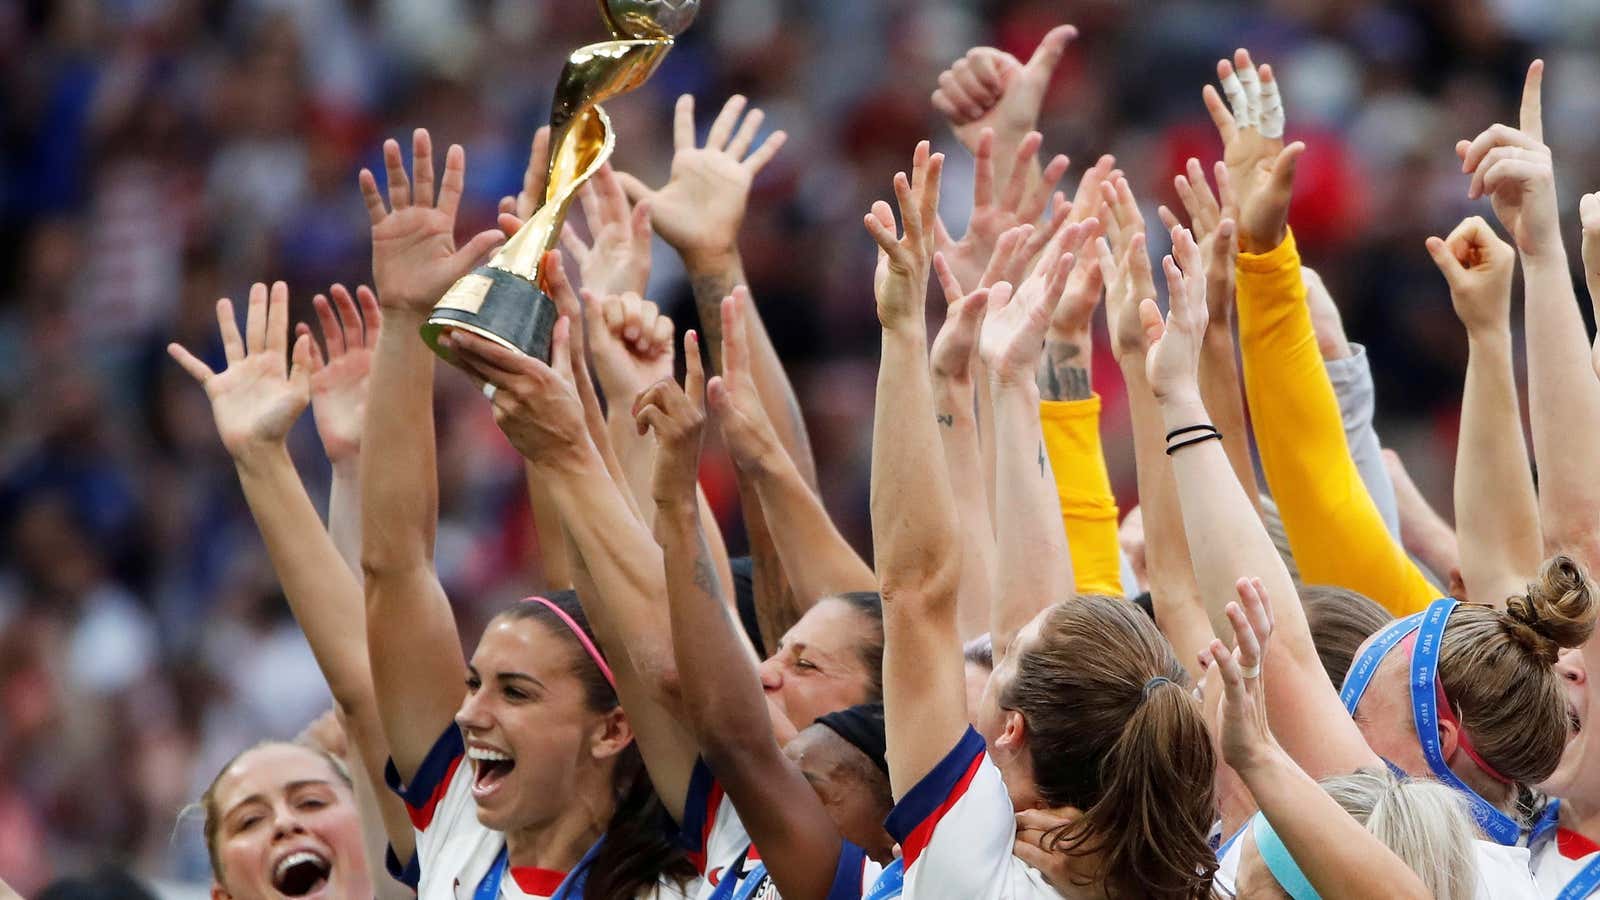 The US women’s team wins its fourth World Cup in Lyon, France.